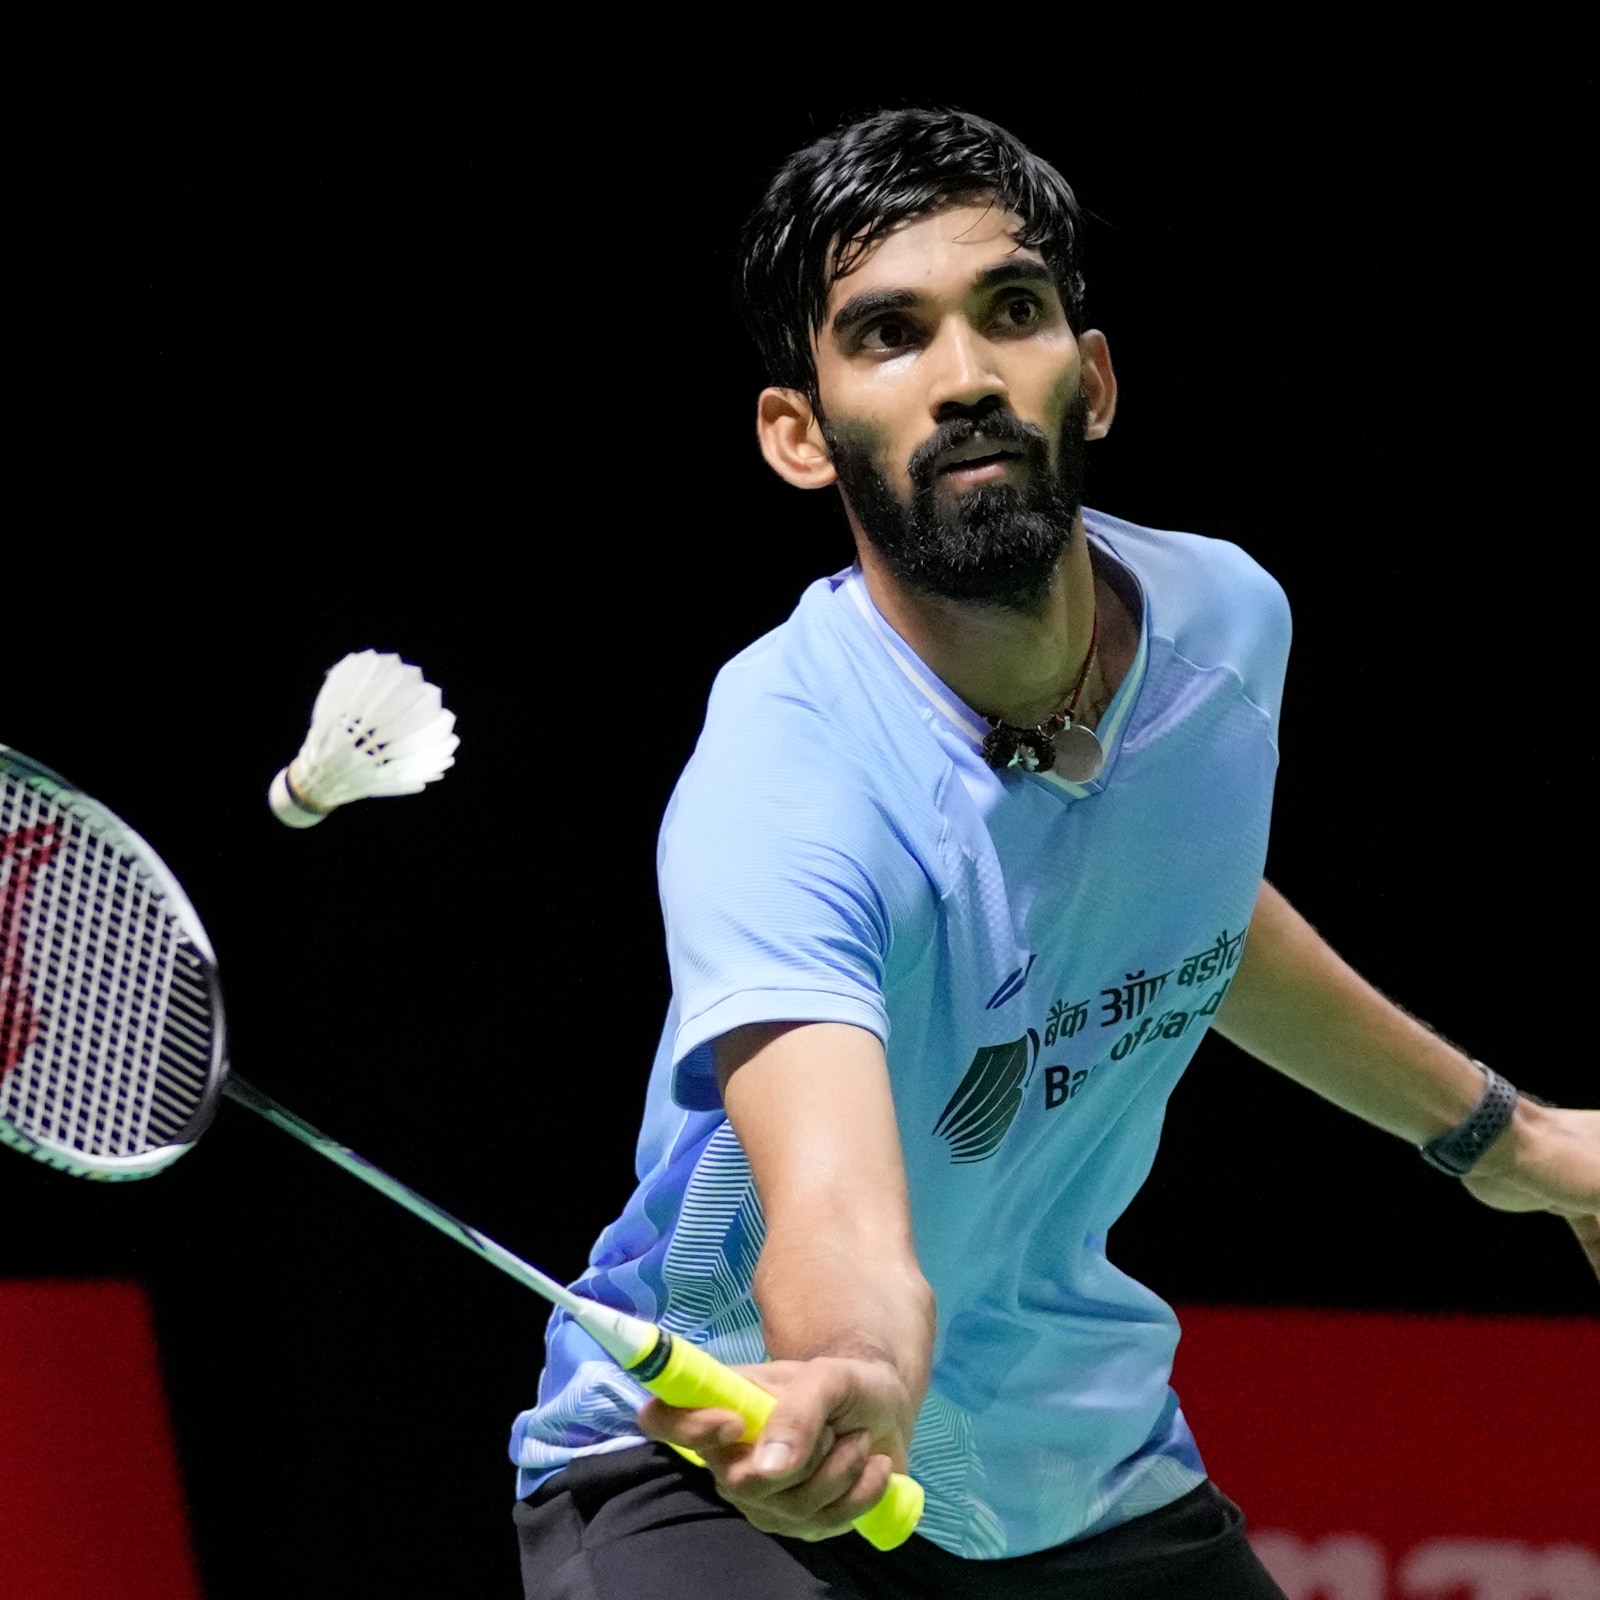 BWF World Championships 2021 Srikanth Starts With a Win, Attri And Sumeeth Exit in First Round